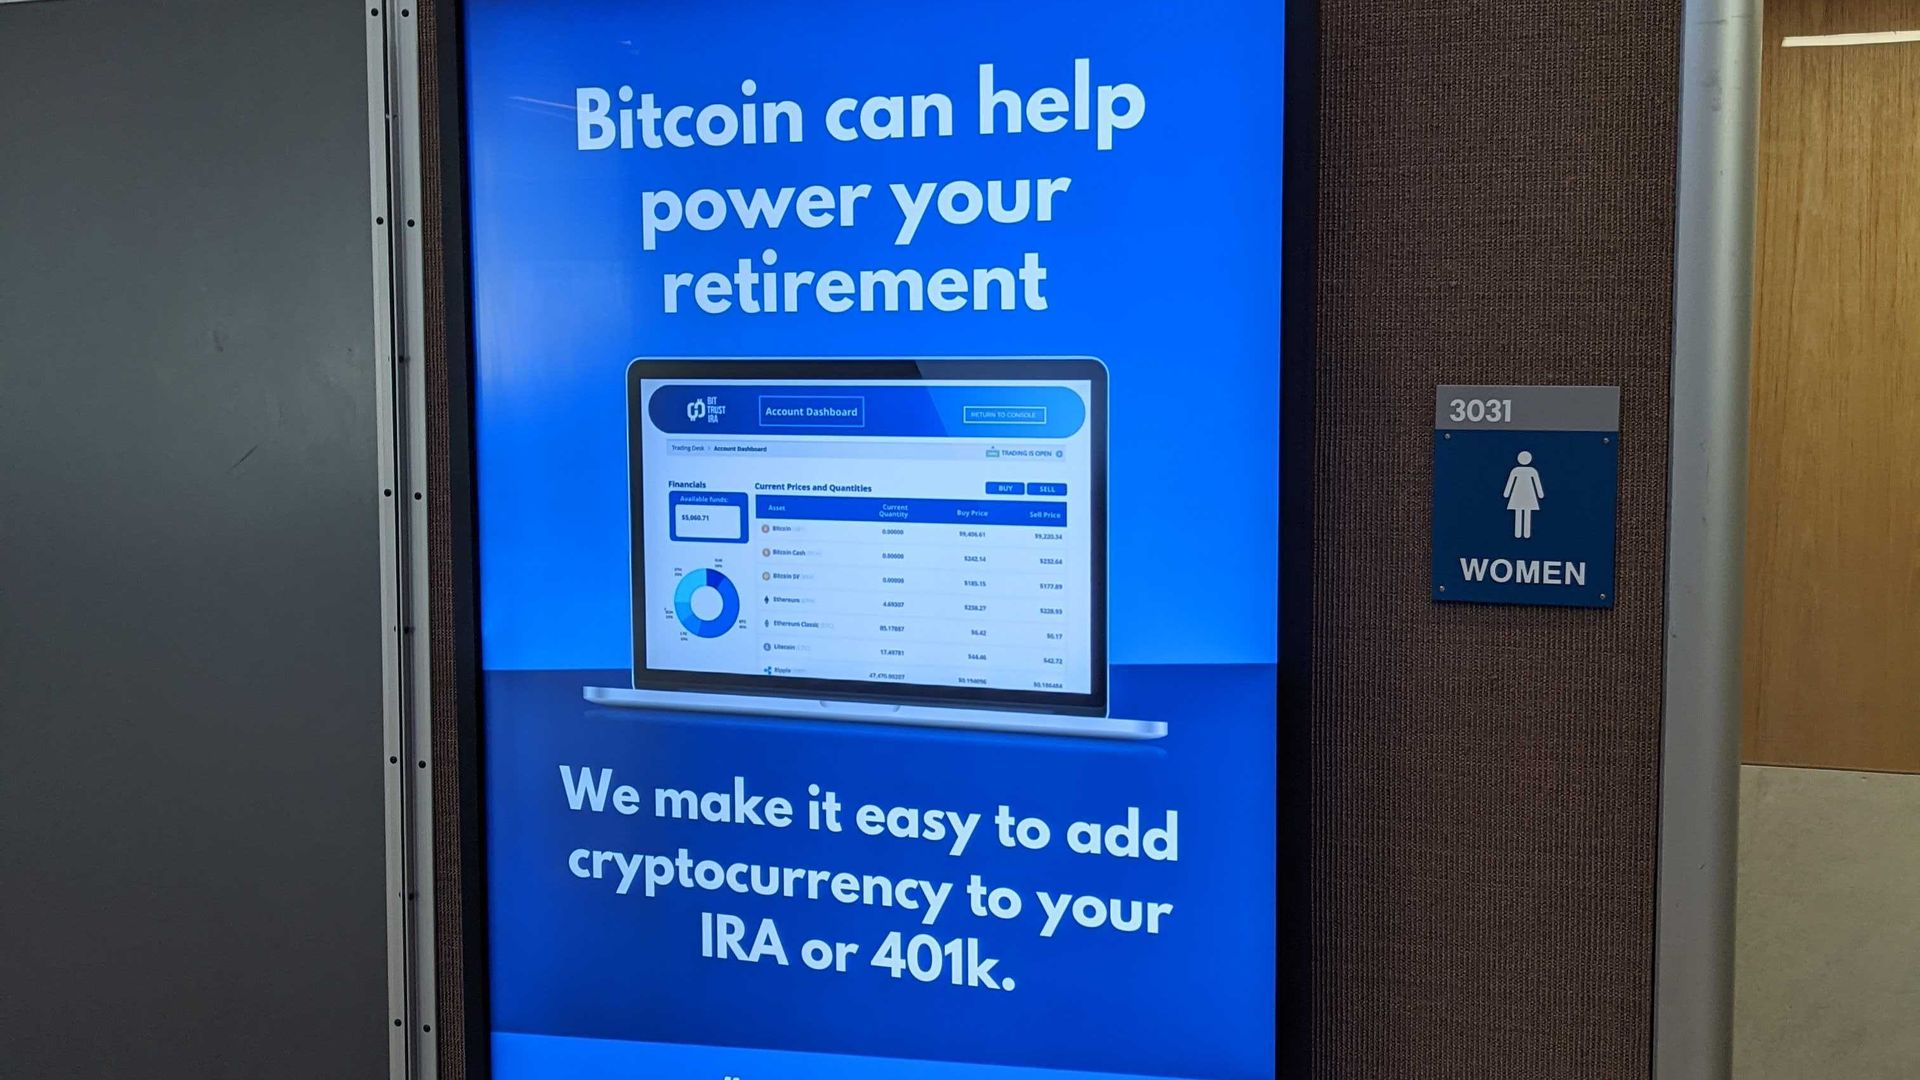 A billboard in the Austin airport advertising Bitcoin as a retirement investment.